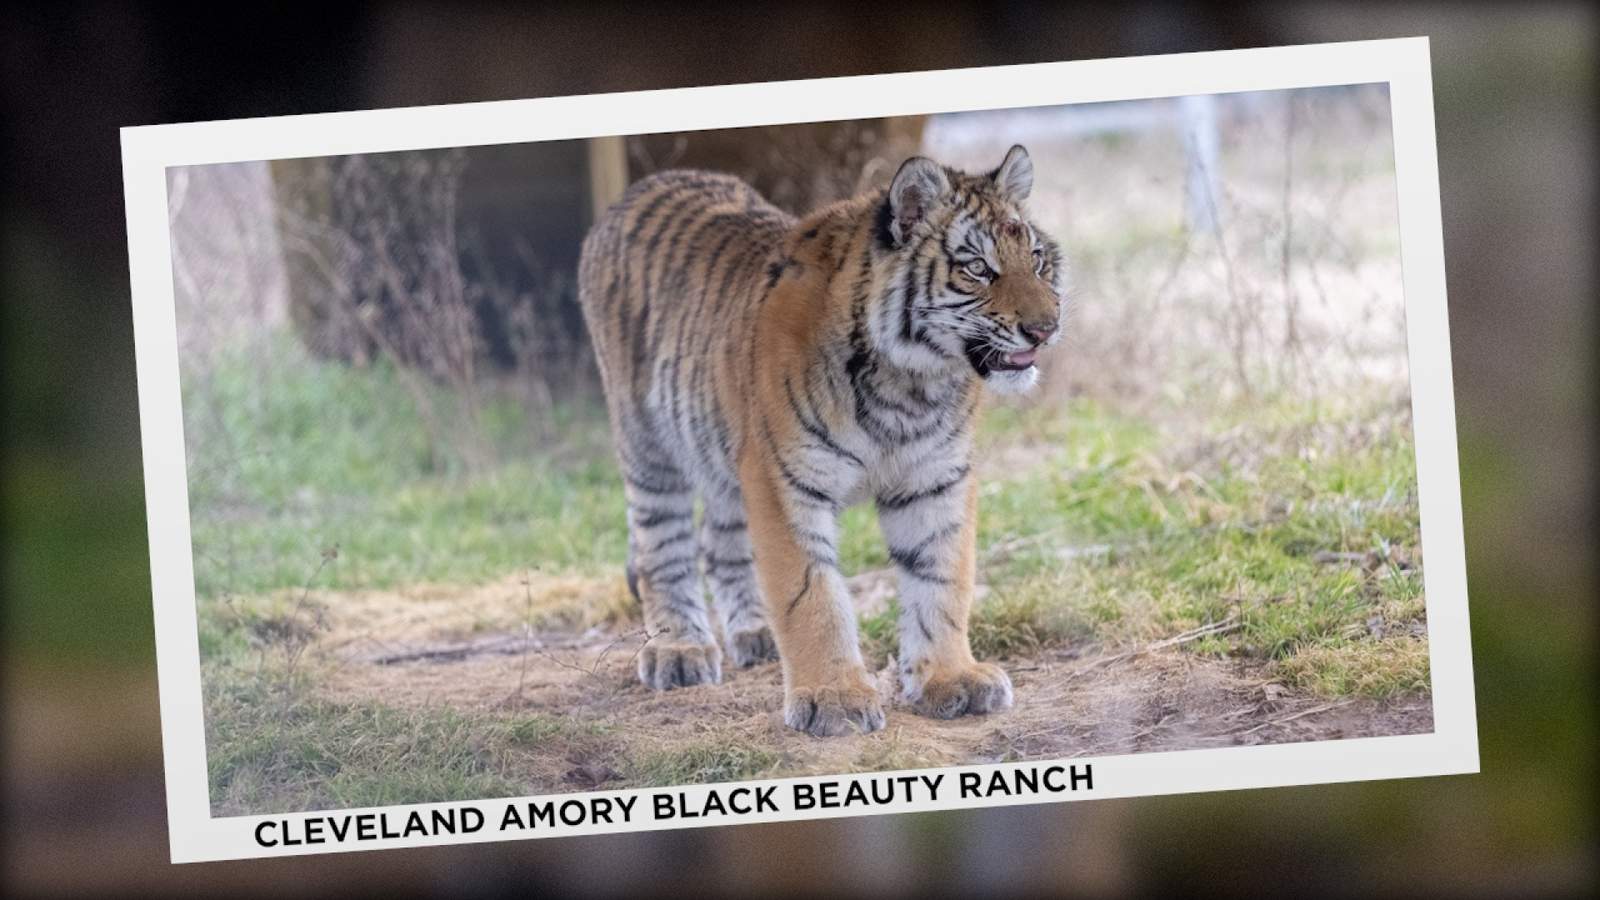 Elsa, the tiger rescued in Bexar County, now at home in Northeast Texas sanctuary